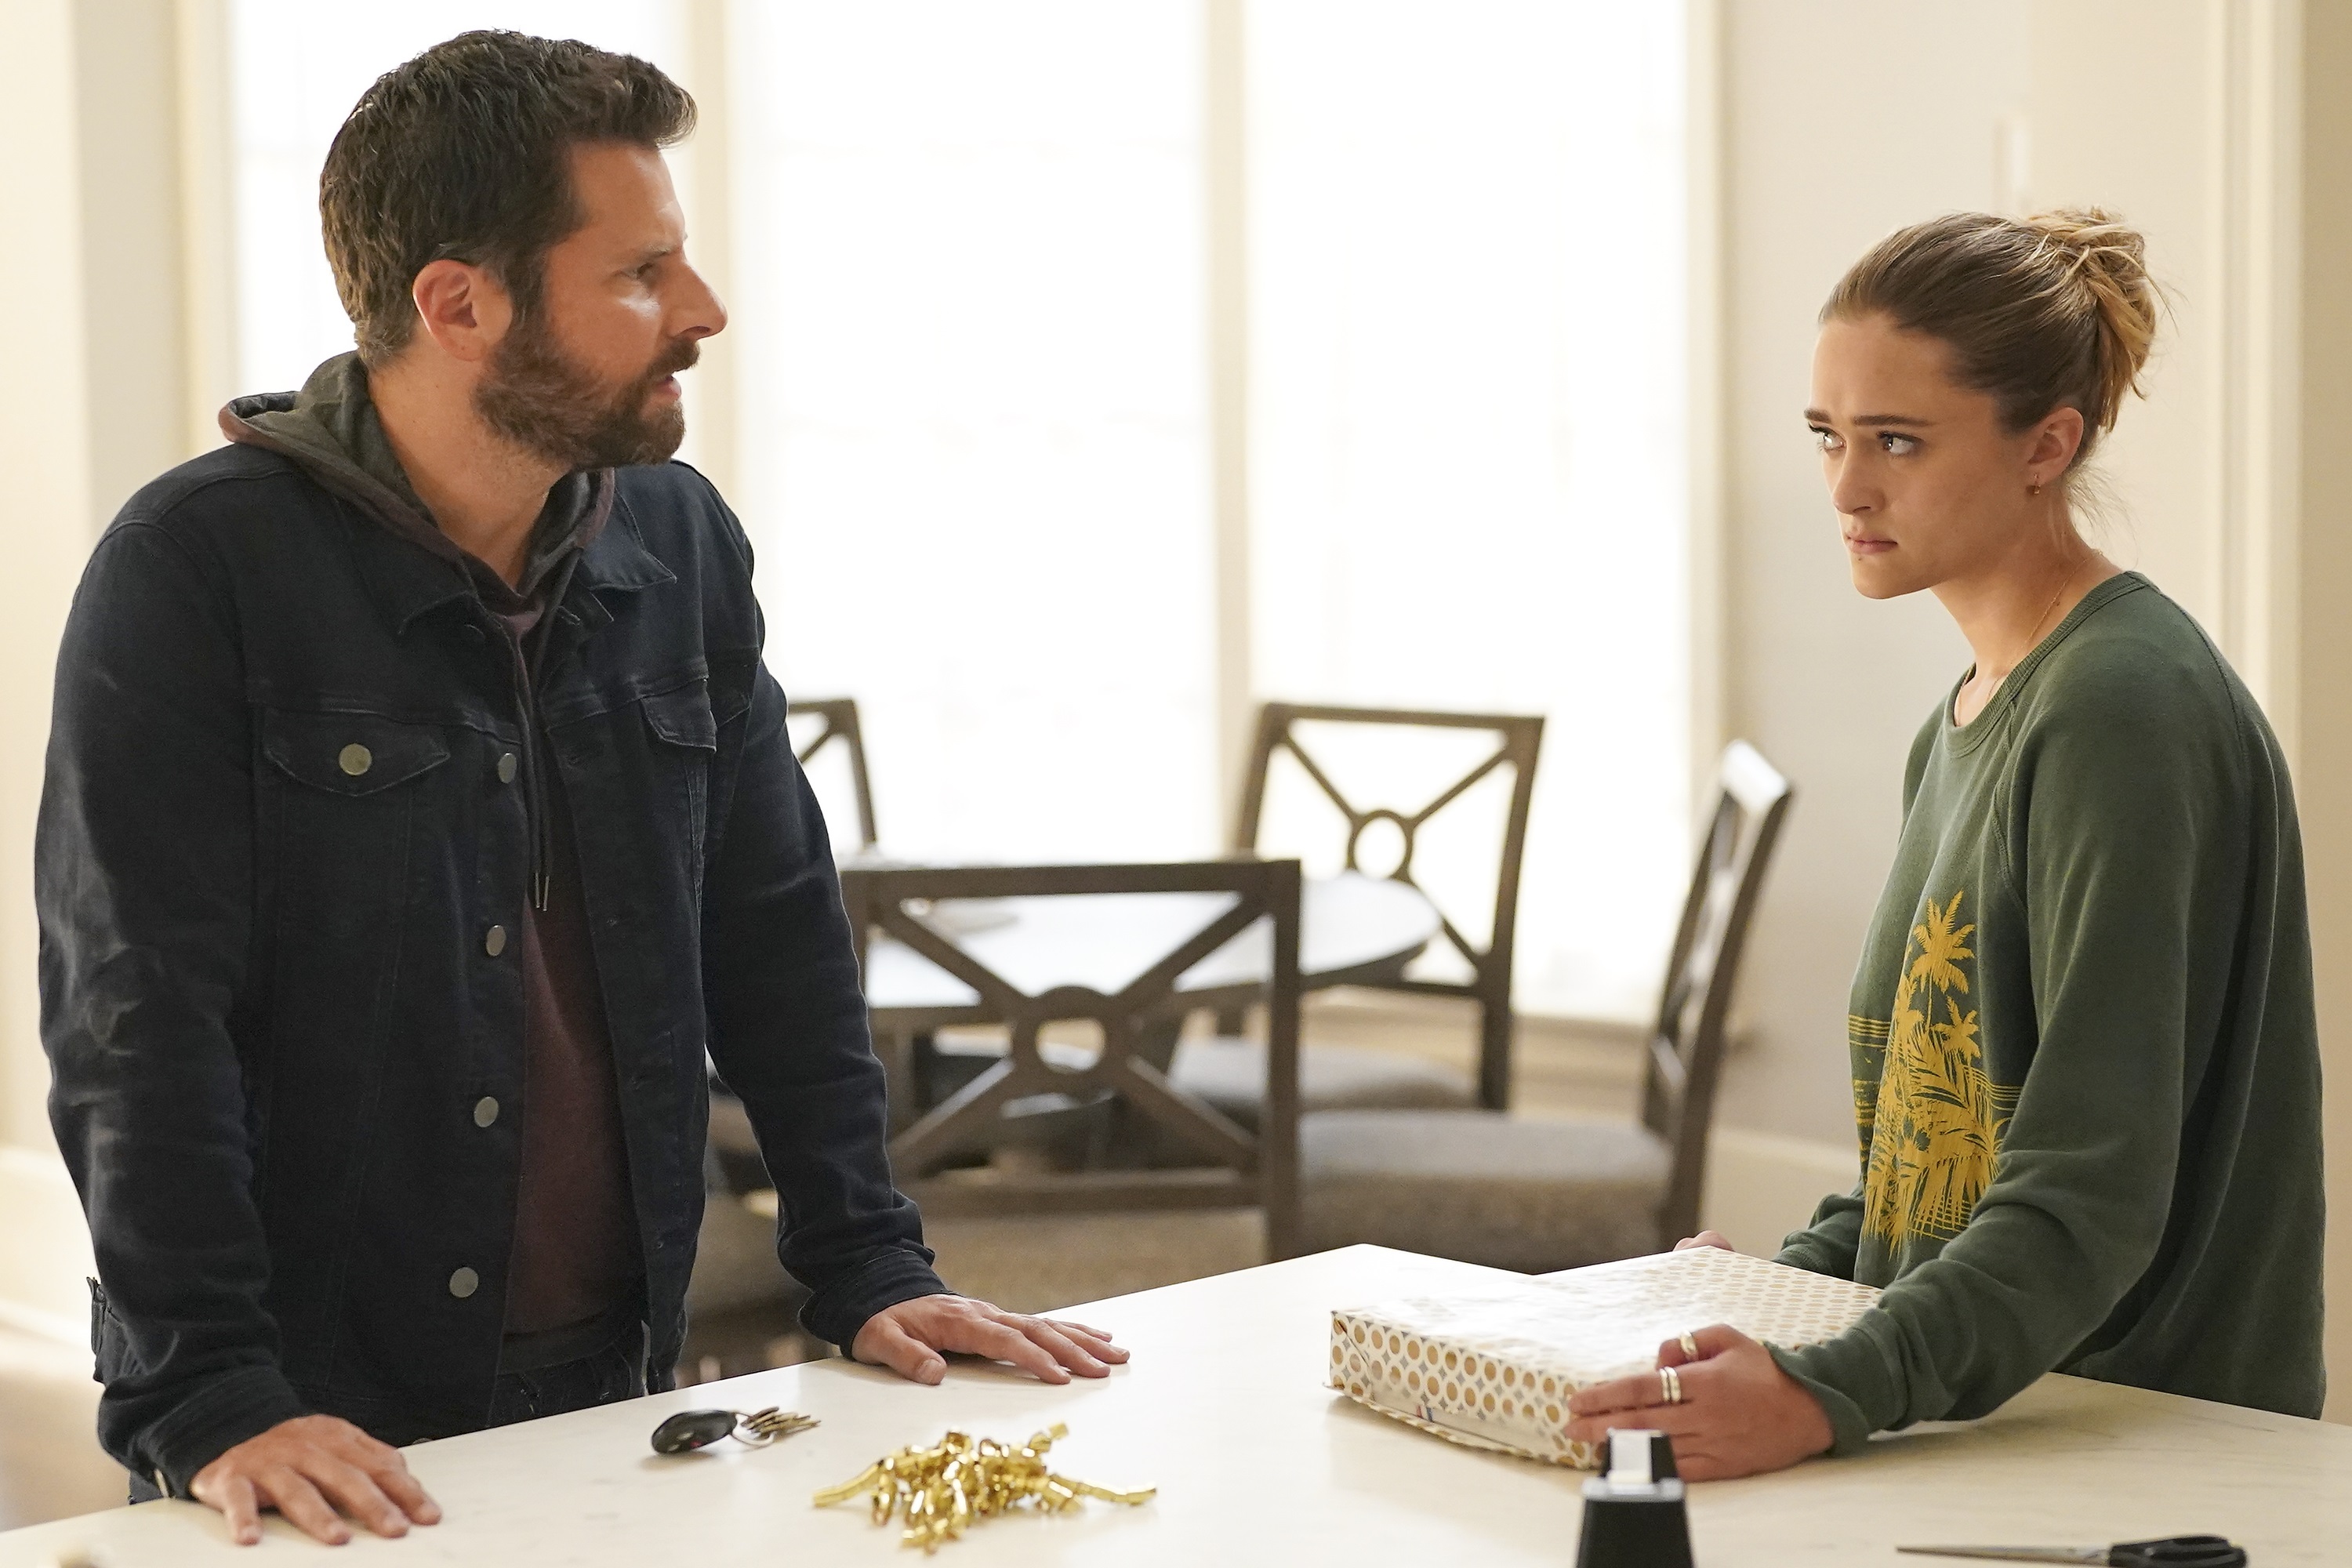 'A Million Little Things' Season 4 Episode 5 Gary and Sophie have a difficult chat